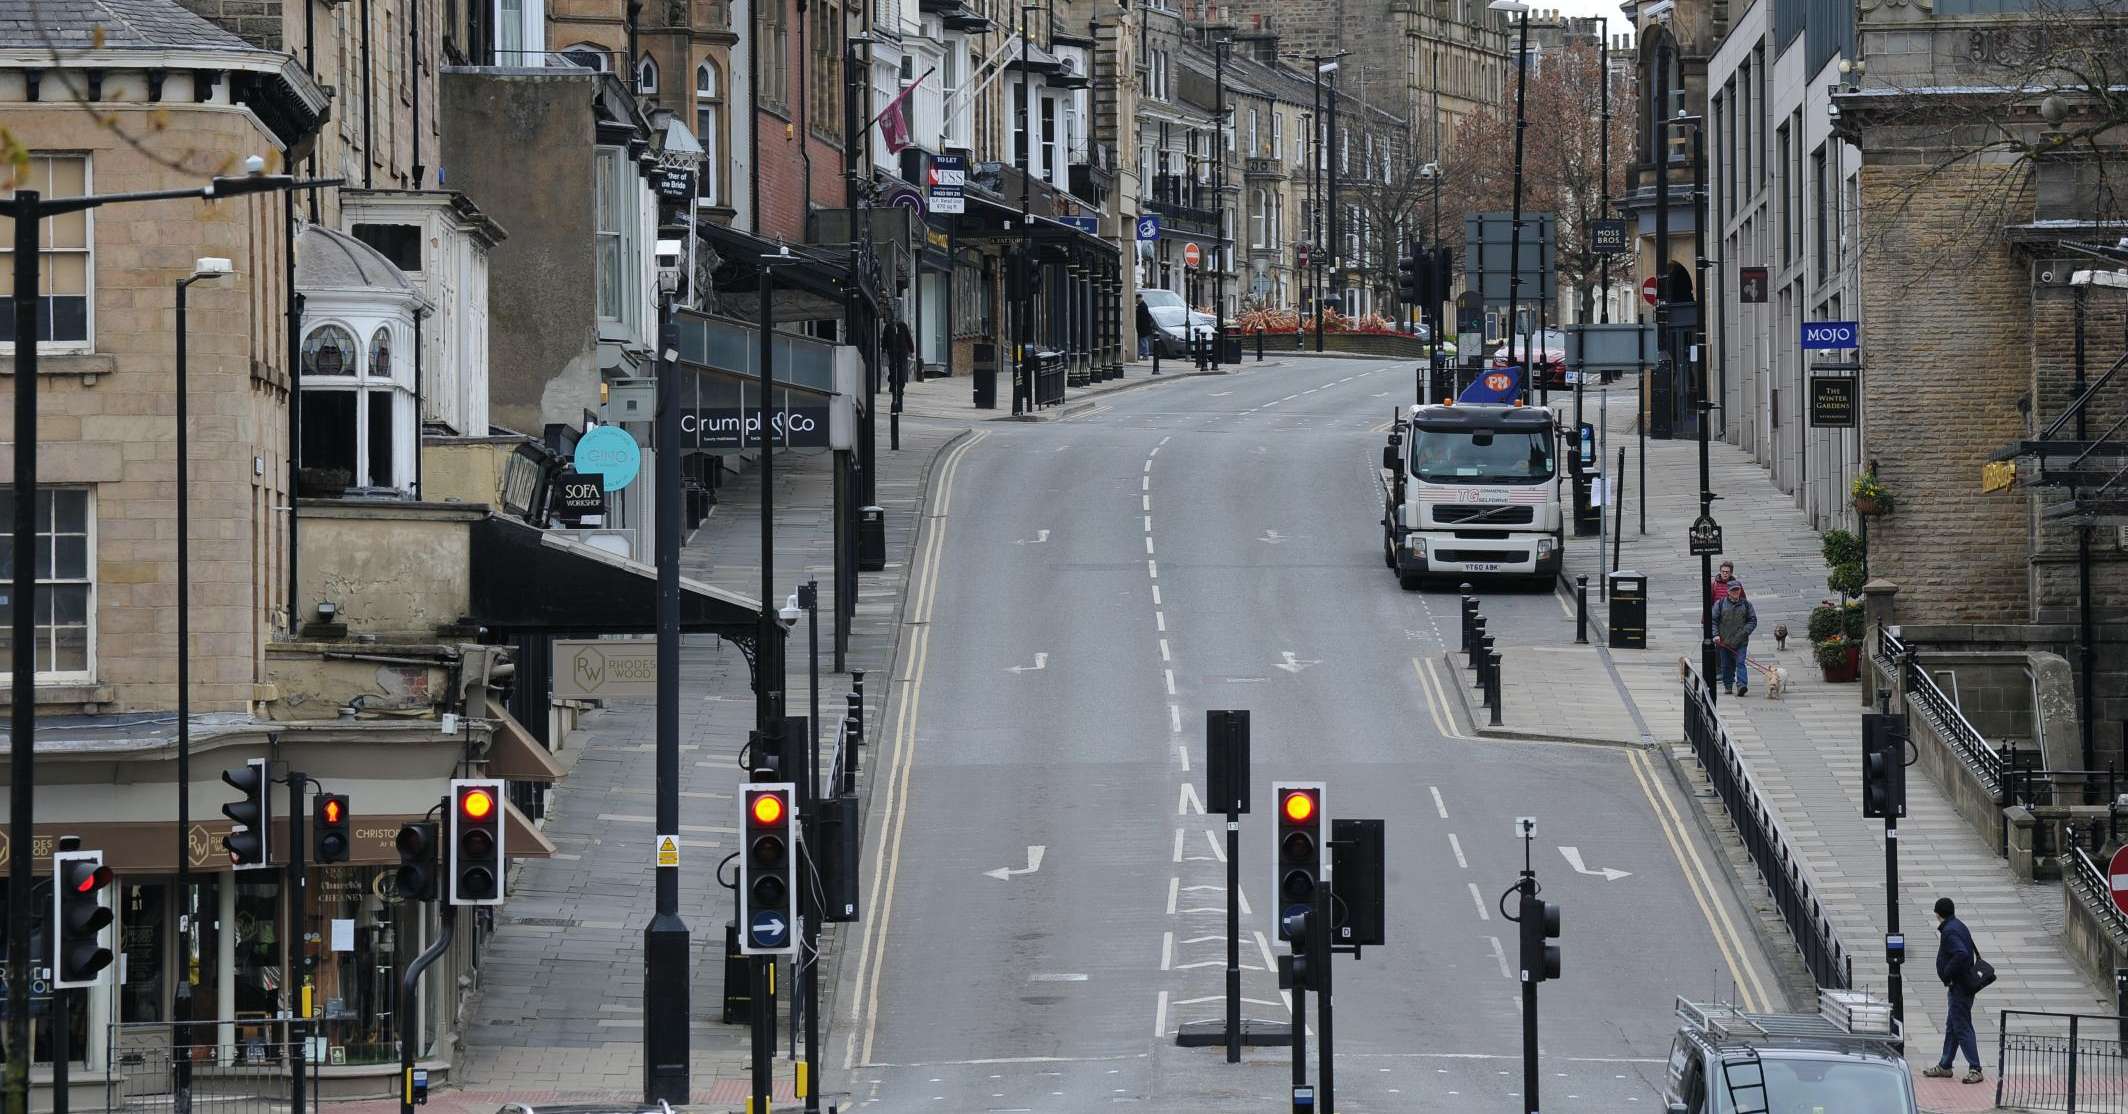 Parliament Street during lockdown in March 2020